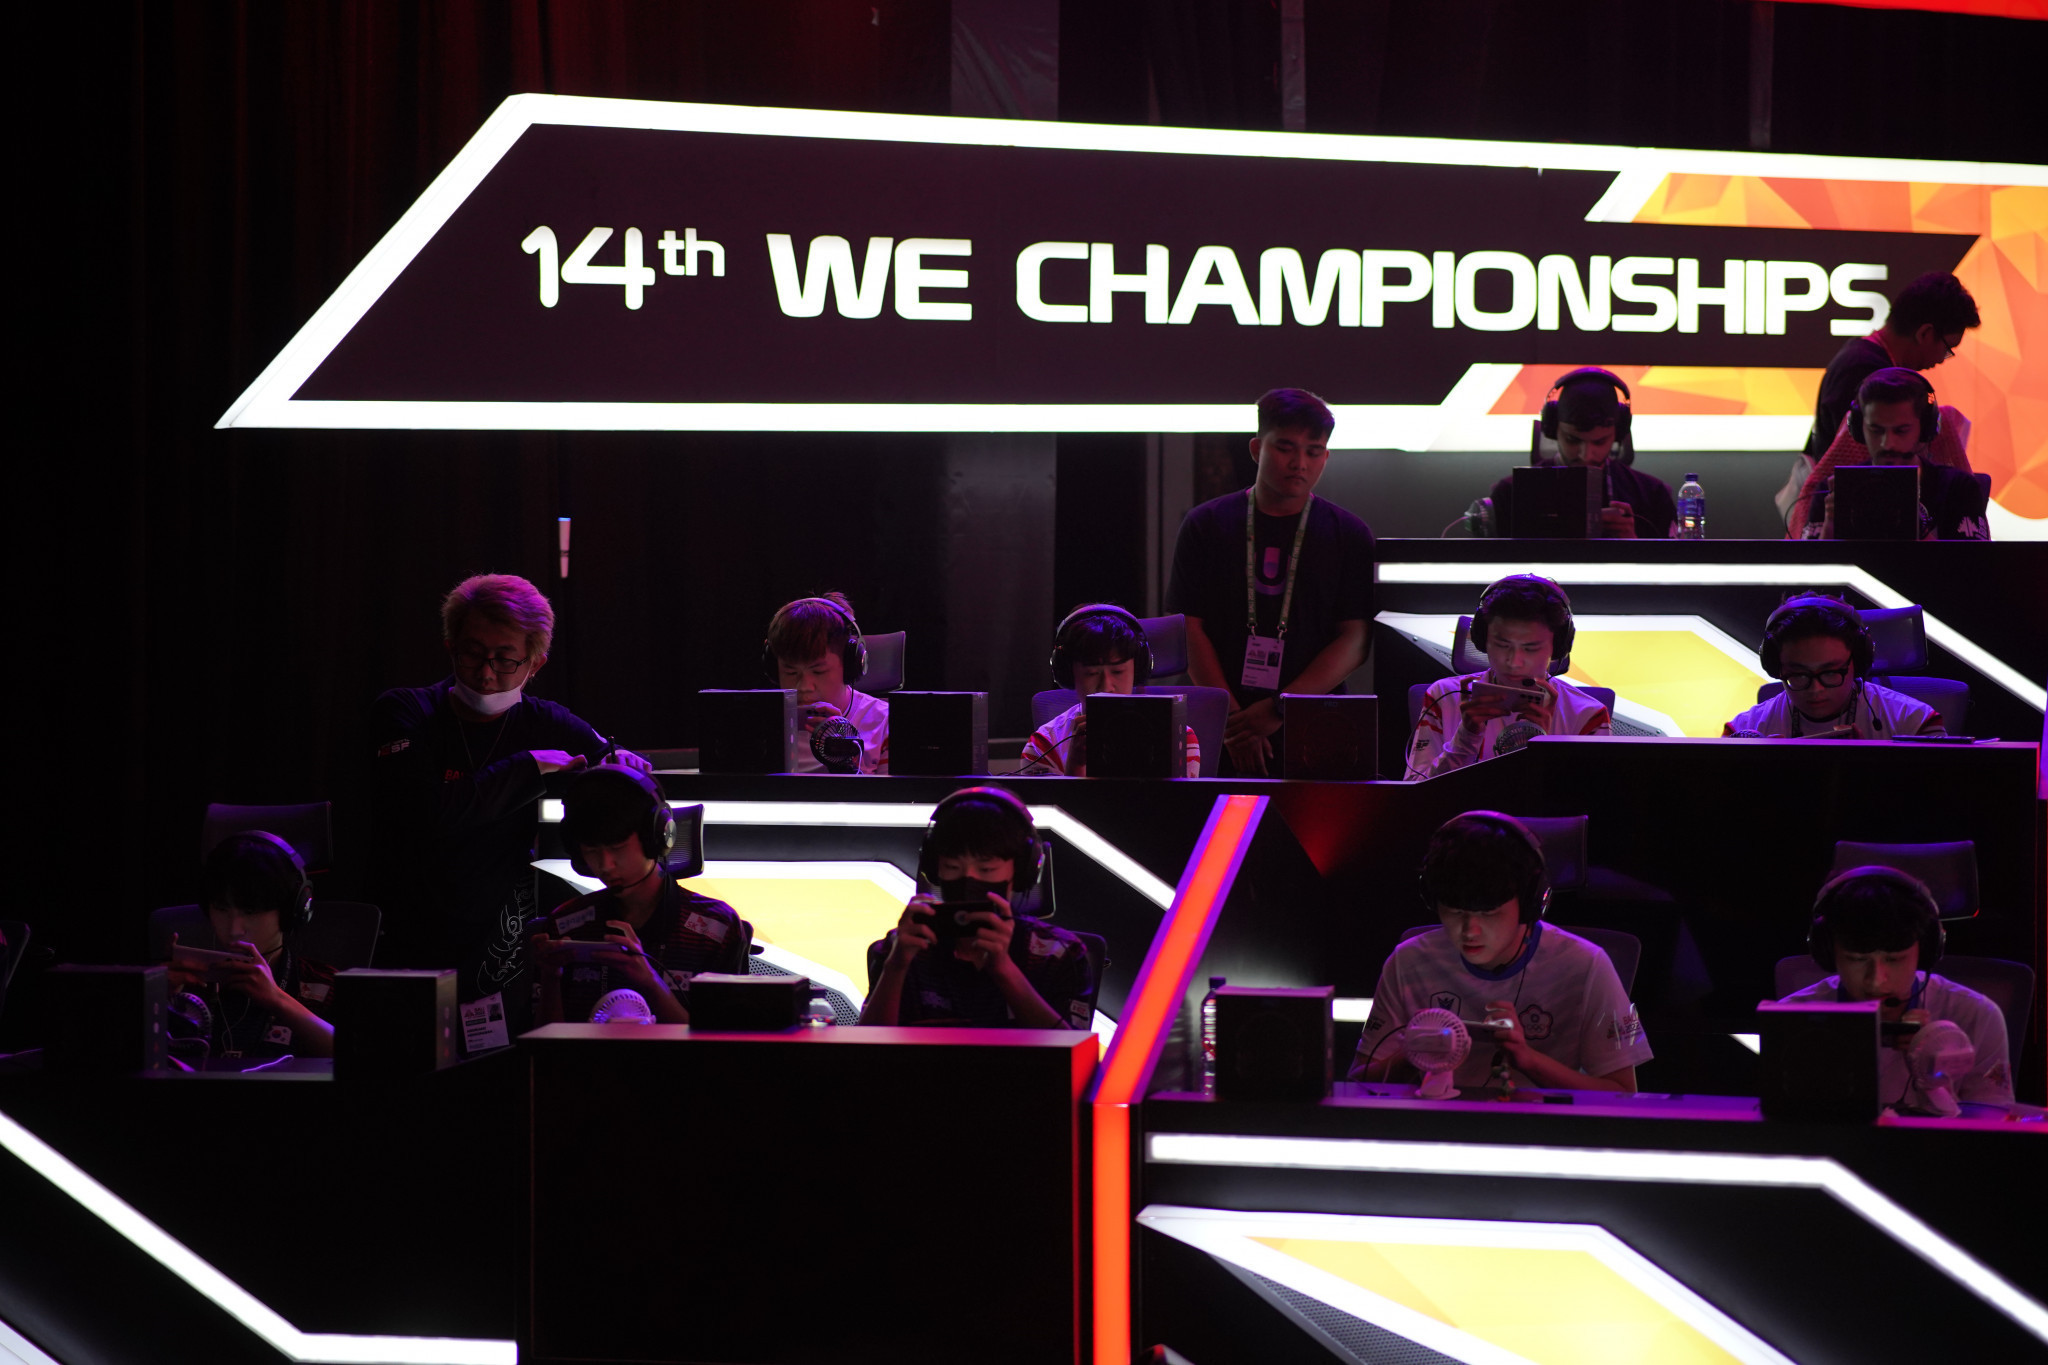 Russia and Belarus will not compete at this year's IESF World Championships ©IESF